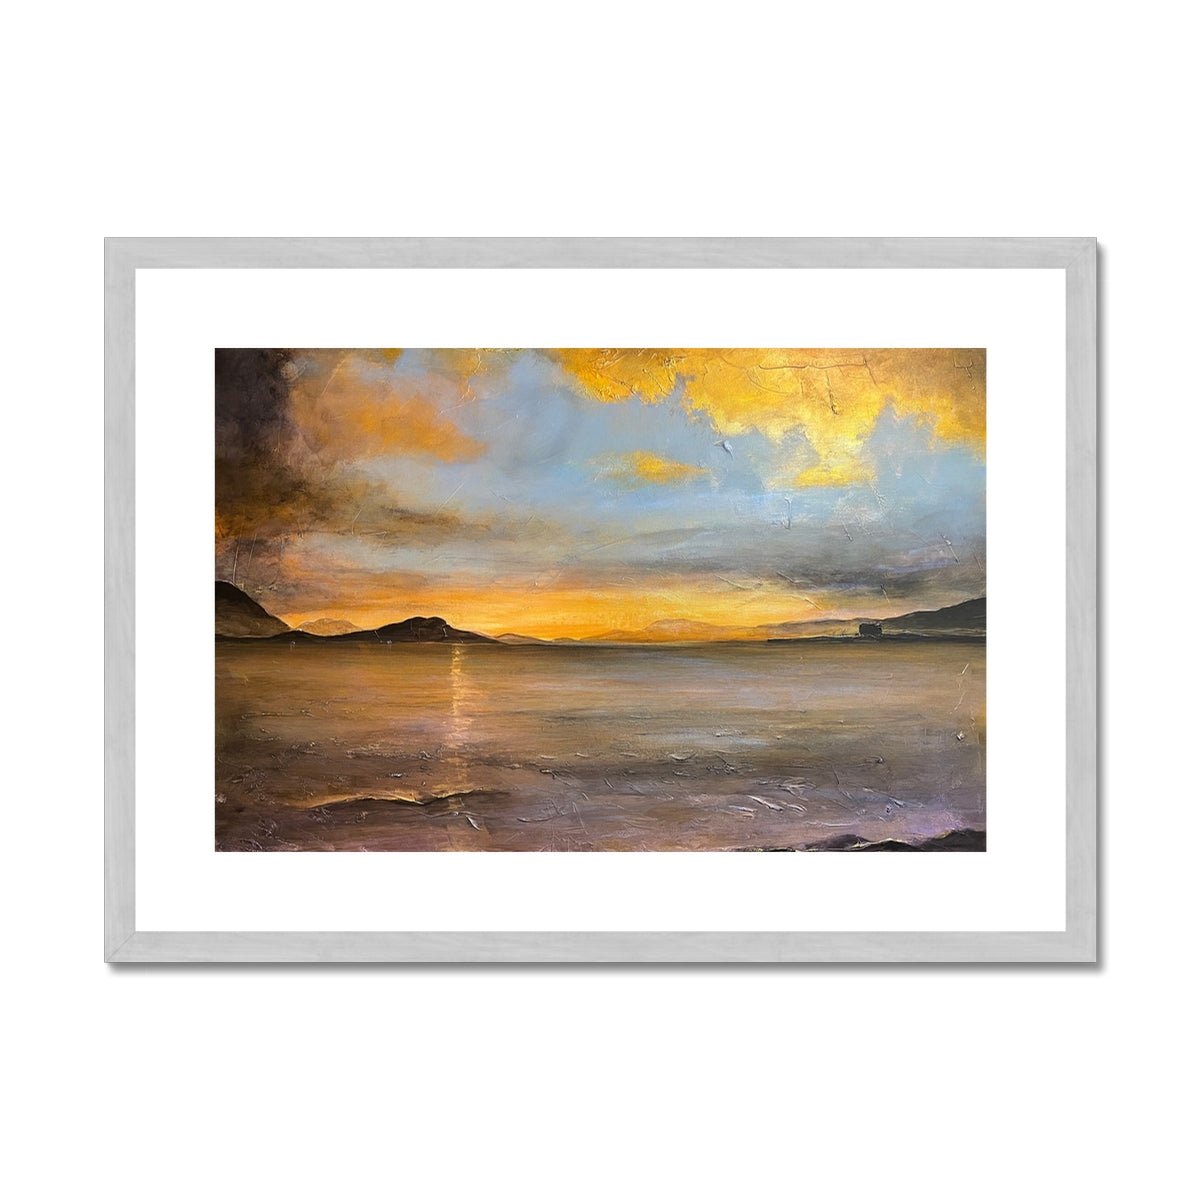 Loch Linnhe Sunset Painting | Antique Framed & Mounted Prints From Scotland-Antique Framed & Mounted Prints-Scottish Lochs & Mountains Art Gallery-A2 Landscape-Silver Frame-Paintings, Prints, Homeware, Art Gifts From Scotland By Scottish Artist Kevin Hunter